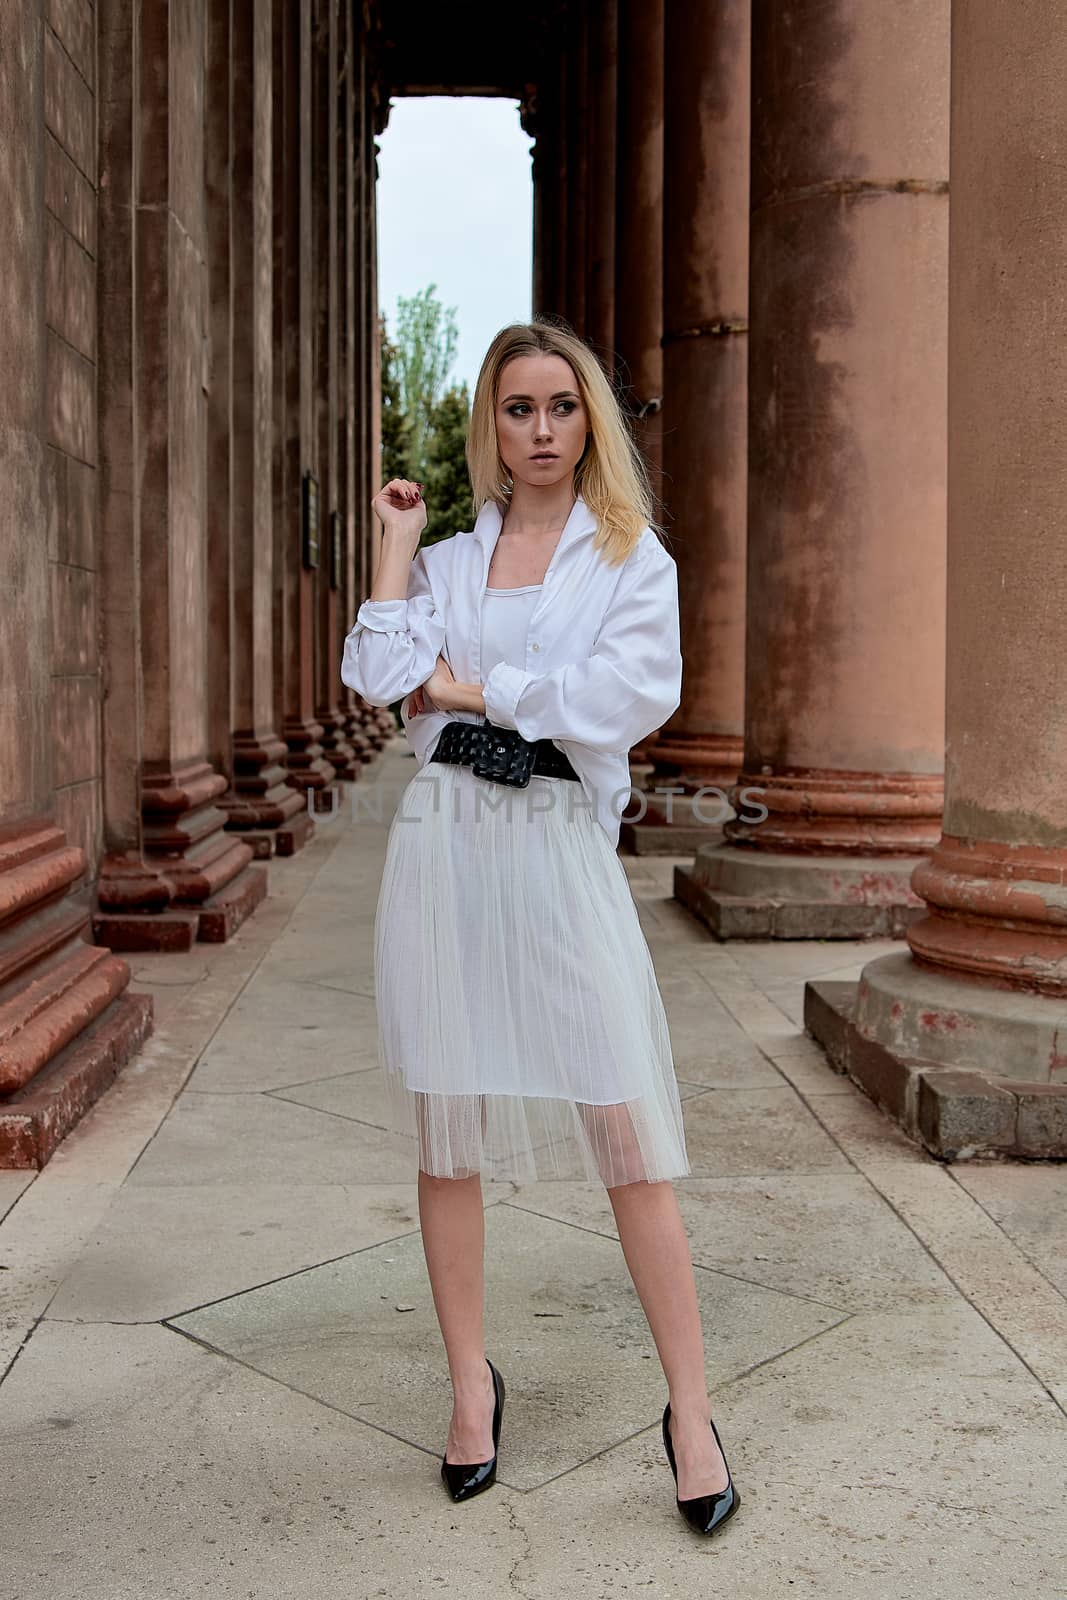 Fashion look's woman. Young woman modern portrait. Young woman dressed in white skirt and shirt posing near the old looking soviet union's architectural building with large pillars and bas-reliefs.